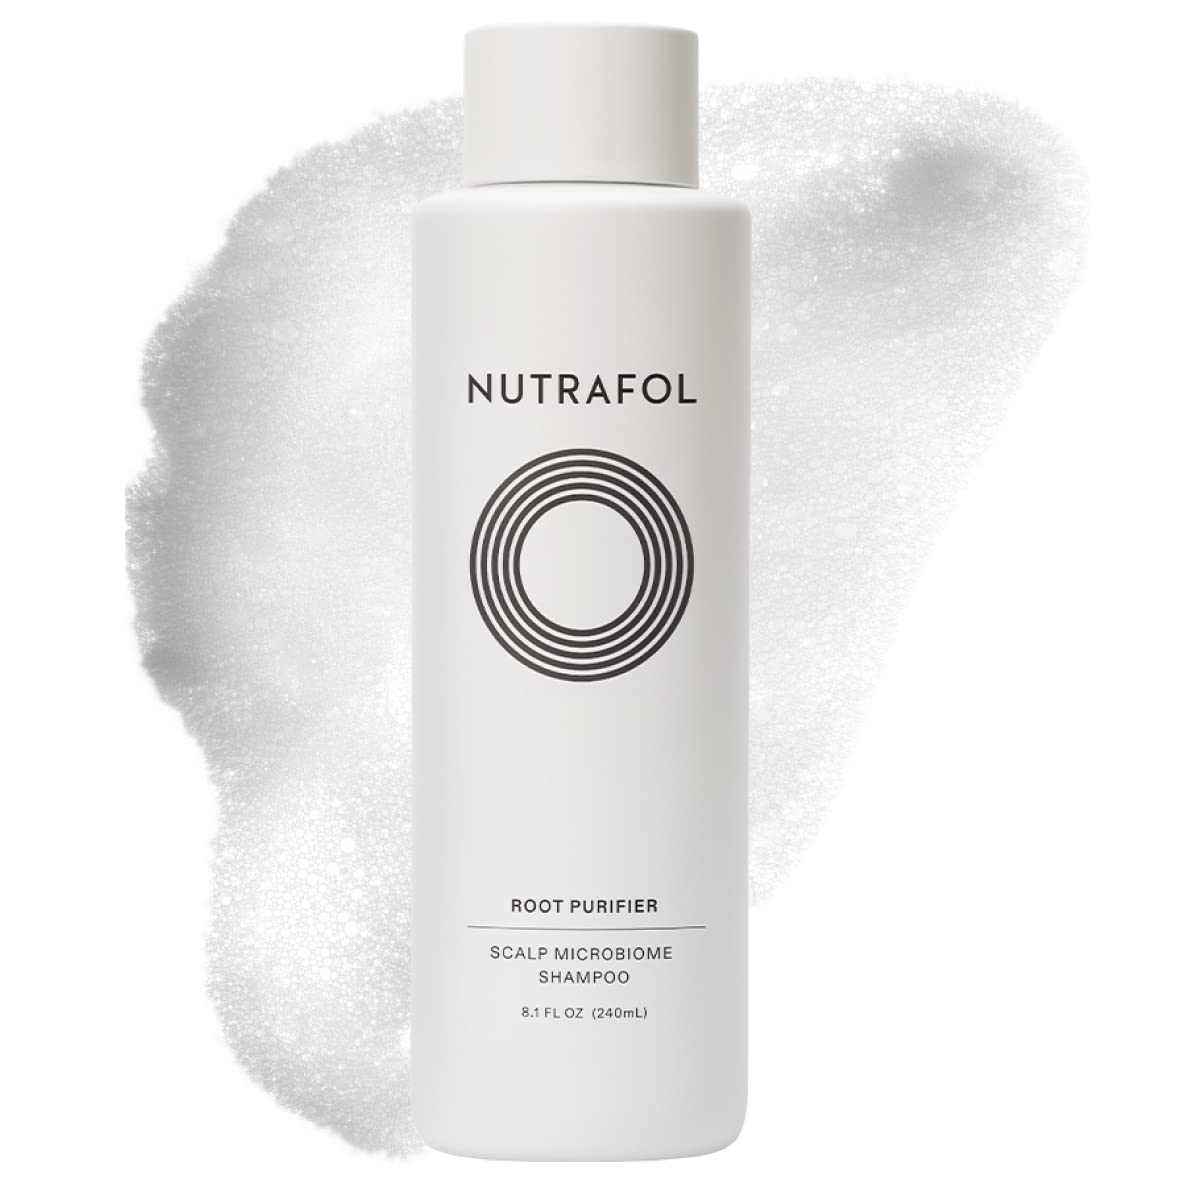 Nutrafol Shampoo, Cleanse and Hydrate Hair and Scalp, [...]